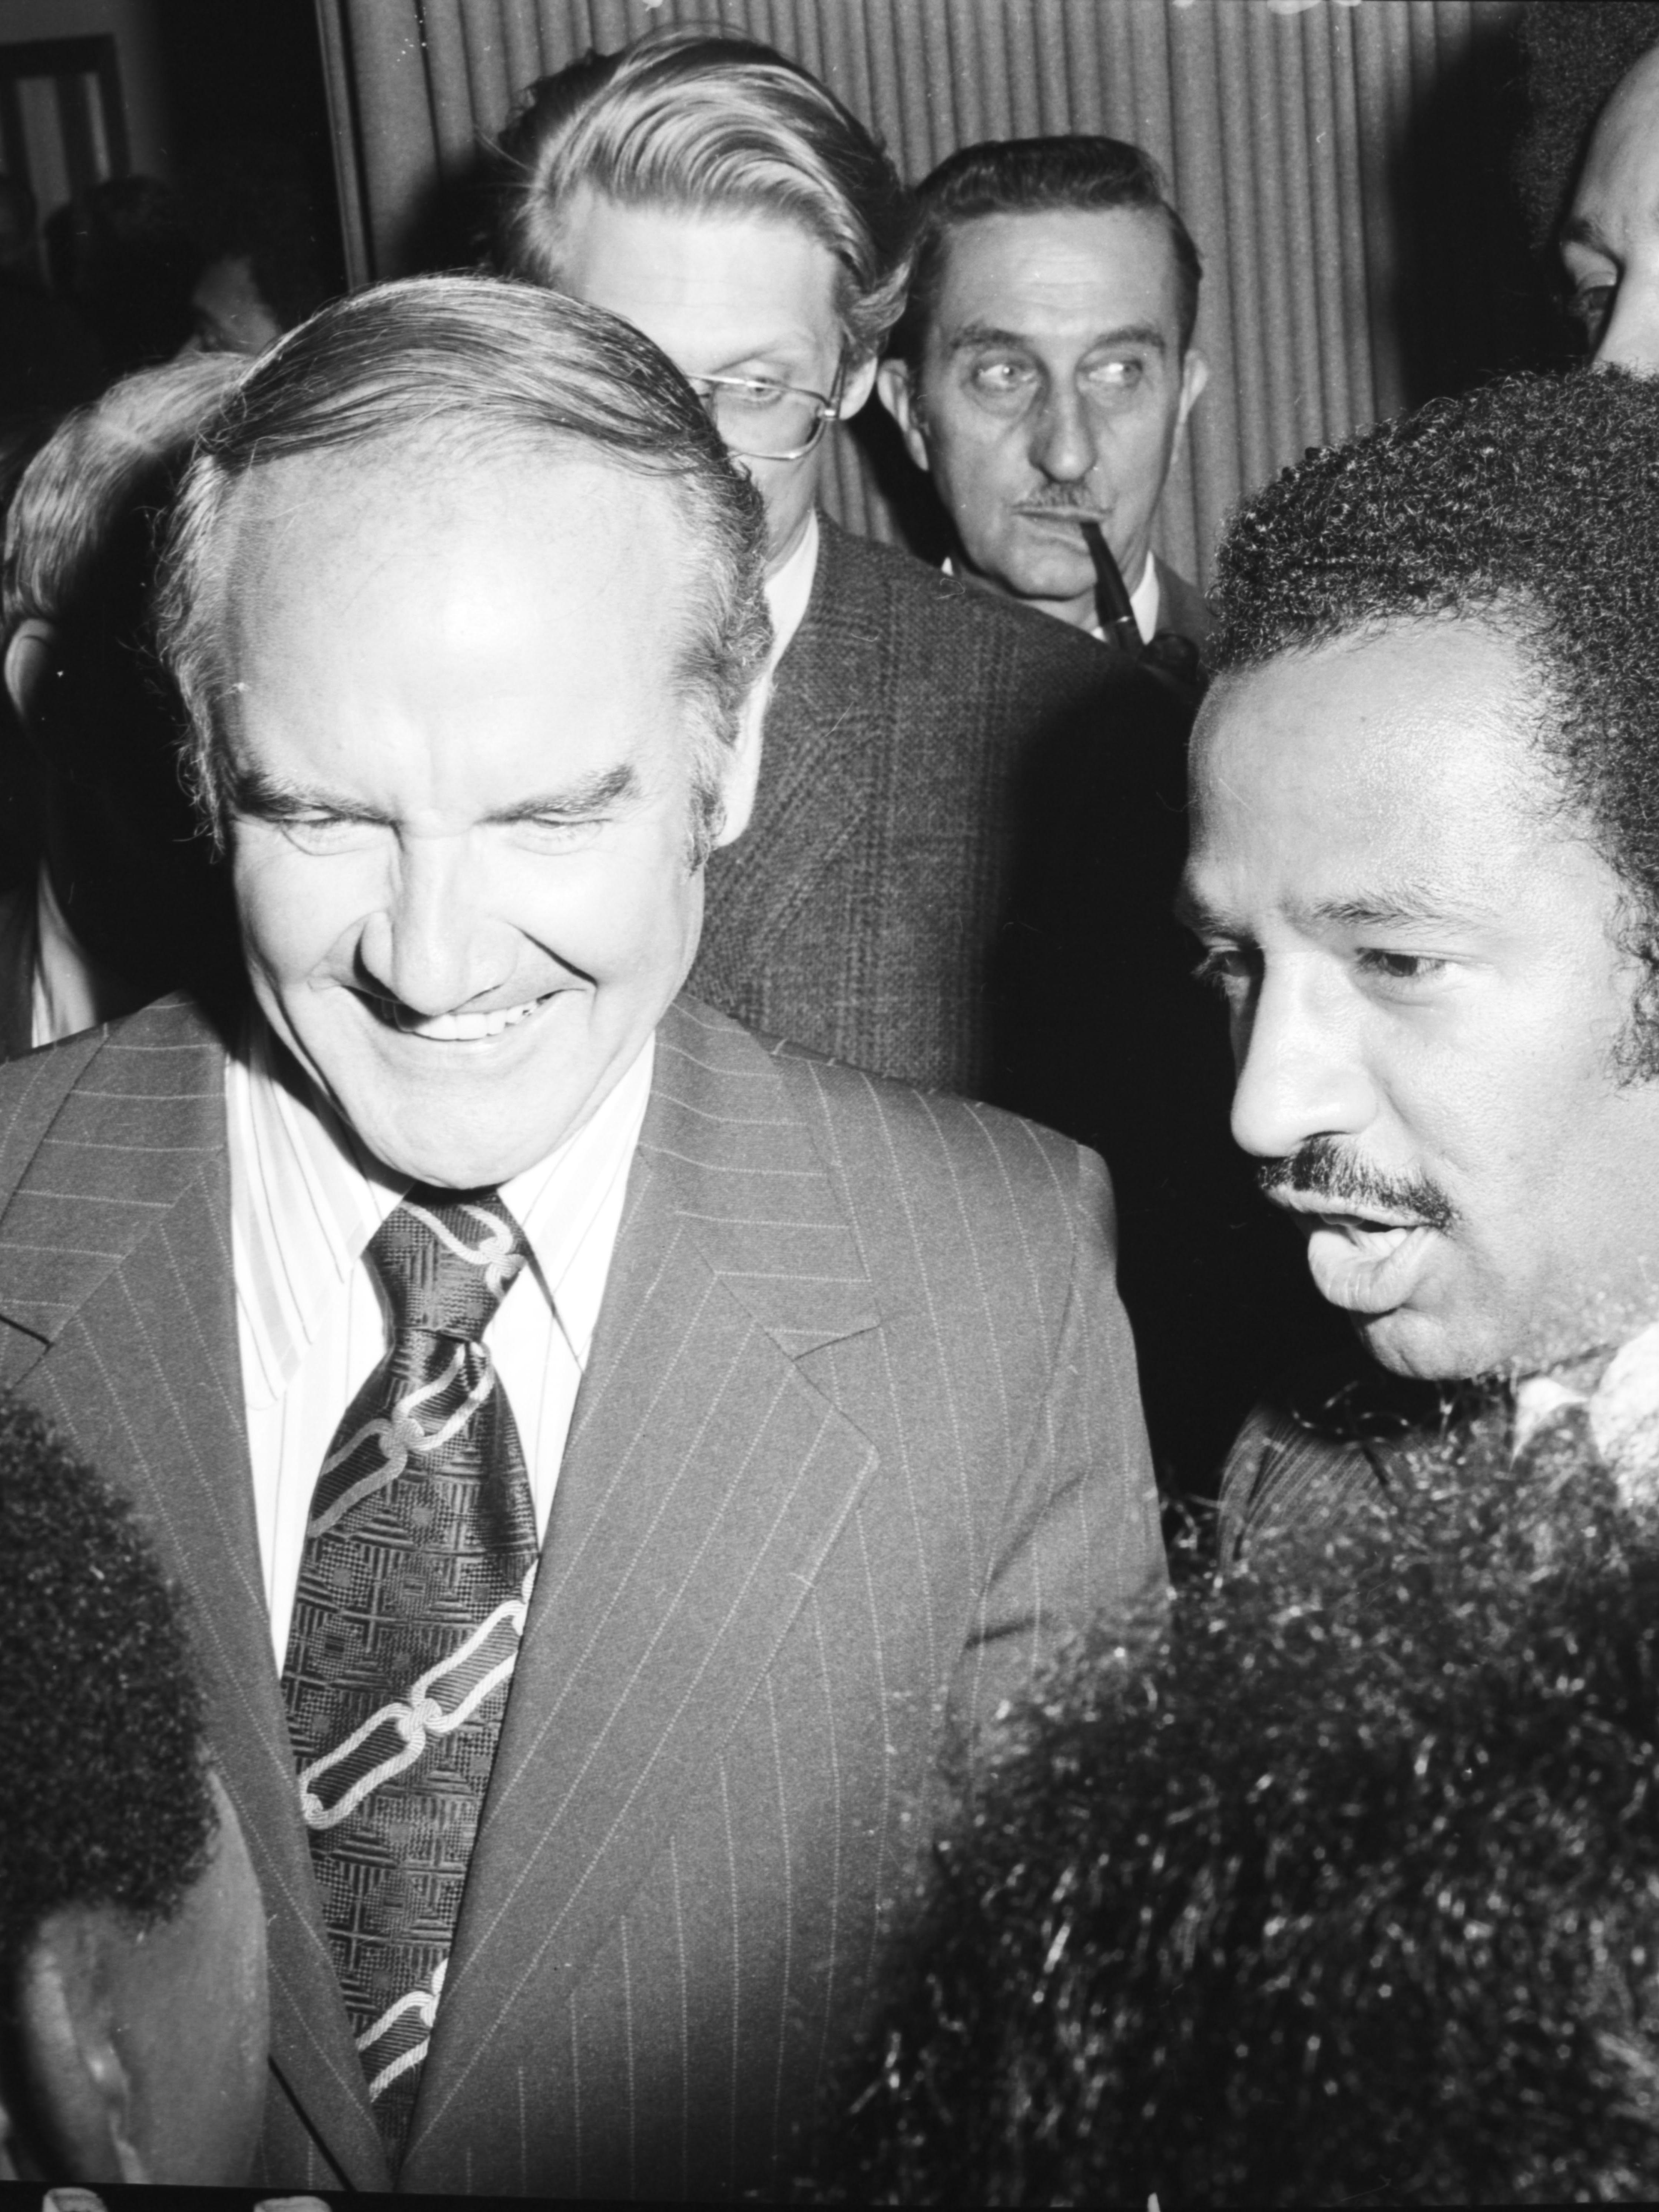 John Conyers campaigns with the Democratic nominee for president, George McGovern, in 1972.